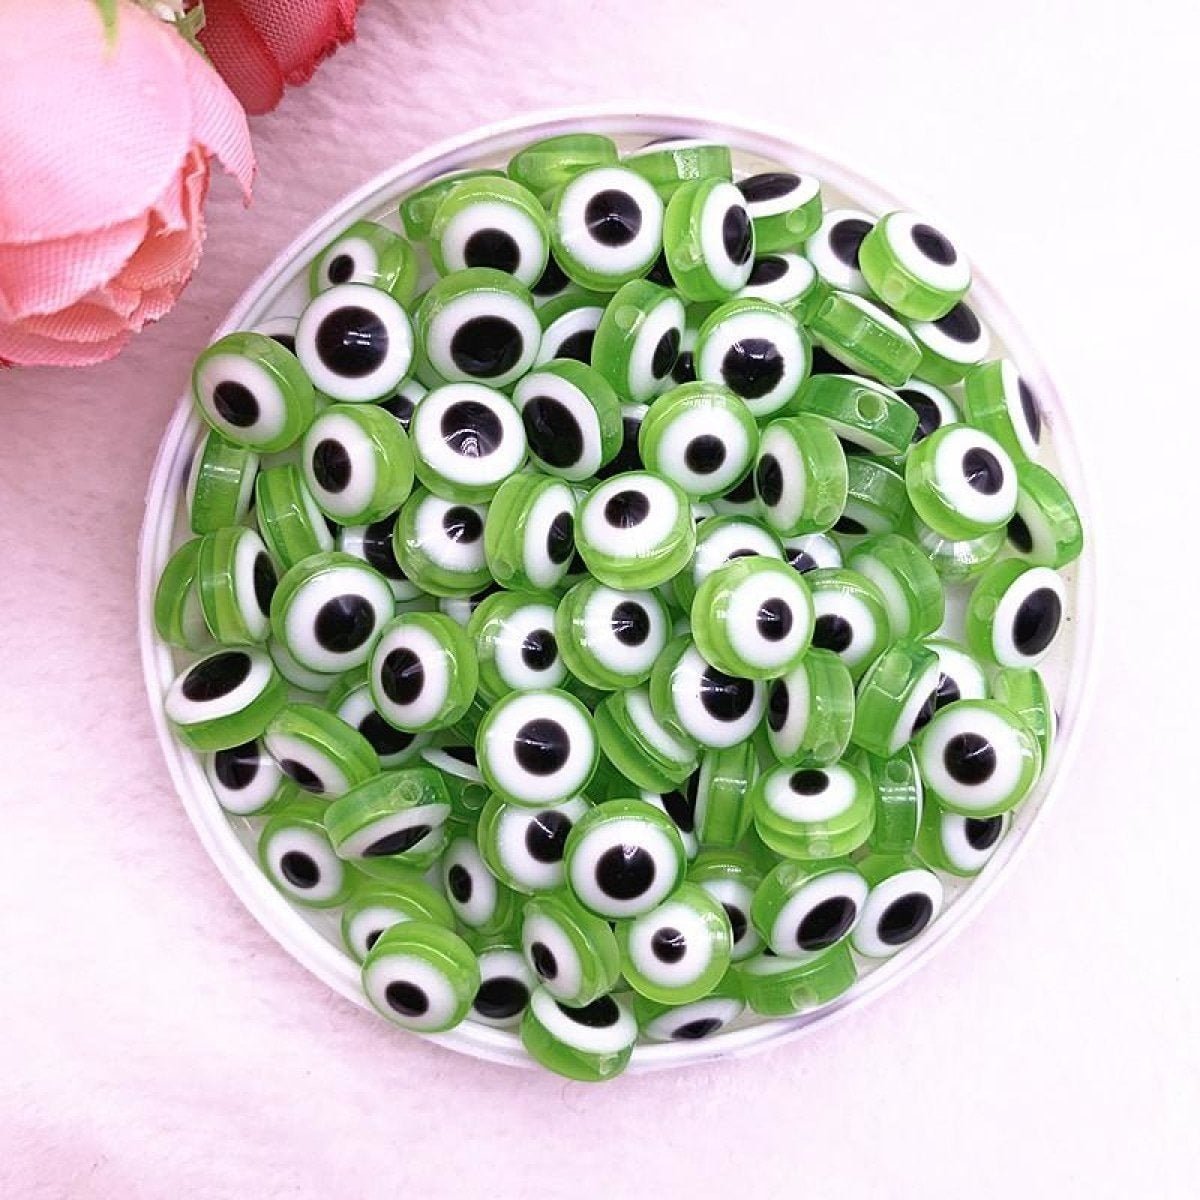 48pcs 8/10mm Resin Spacer Beads Double Sided Eyes for Jewelry Making DIY Bracelet Beads Flat Backing - Green 8mm - - Asia Sell